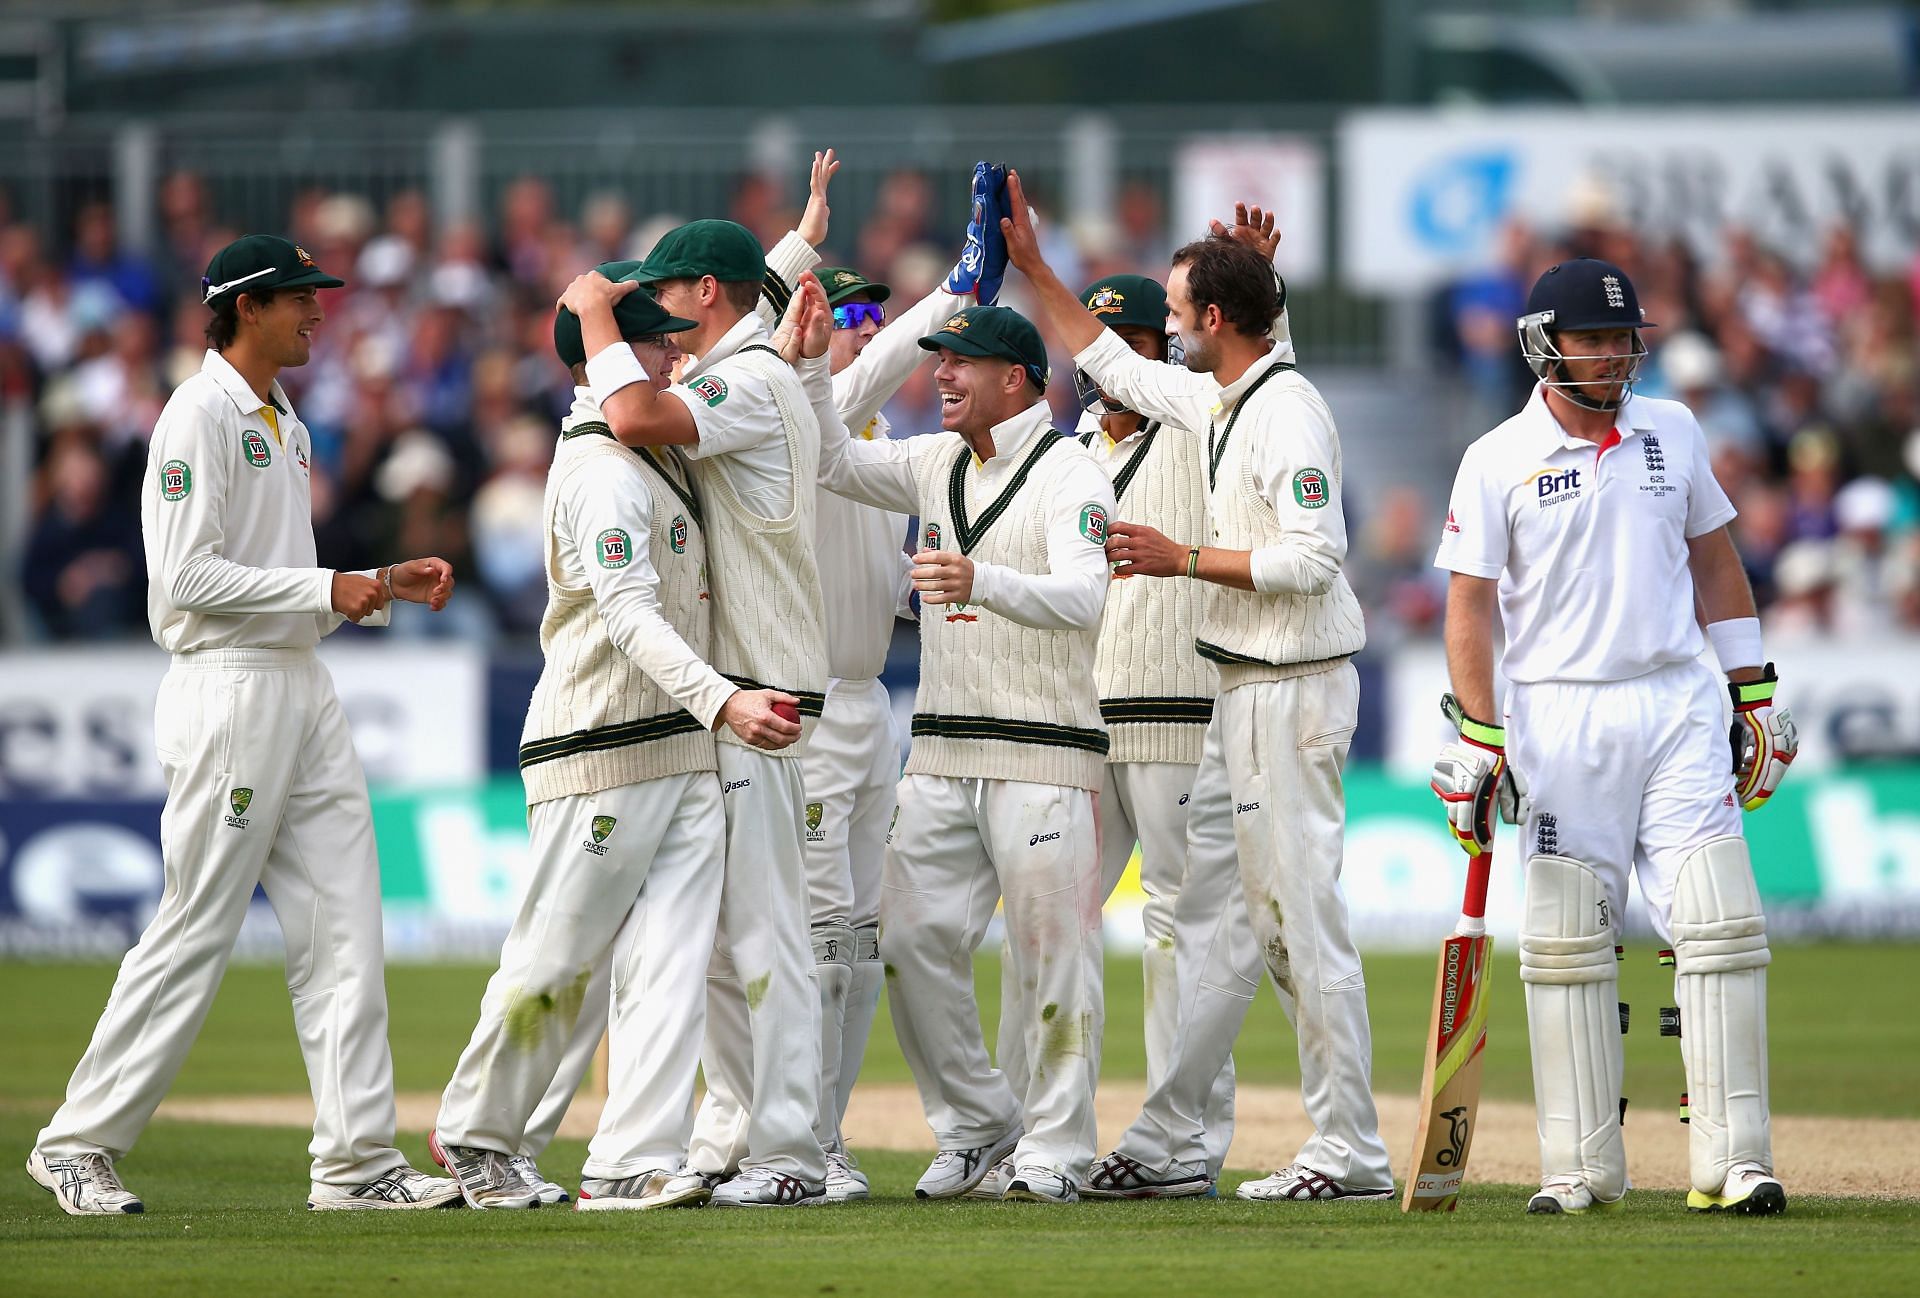 Nathan Lyon celebrates after dismissing Kevin Pietersen in the 2013 Ashes.